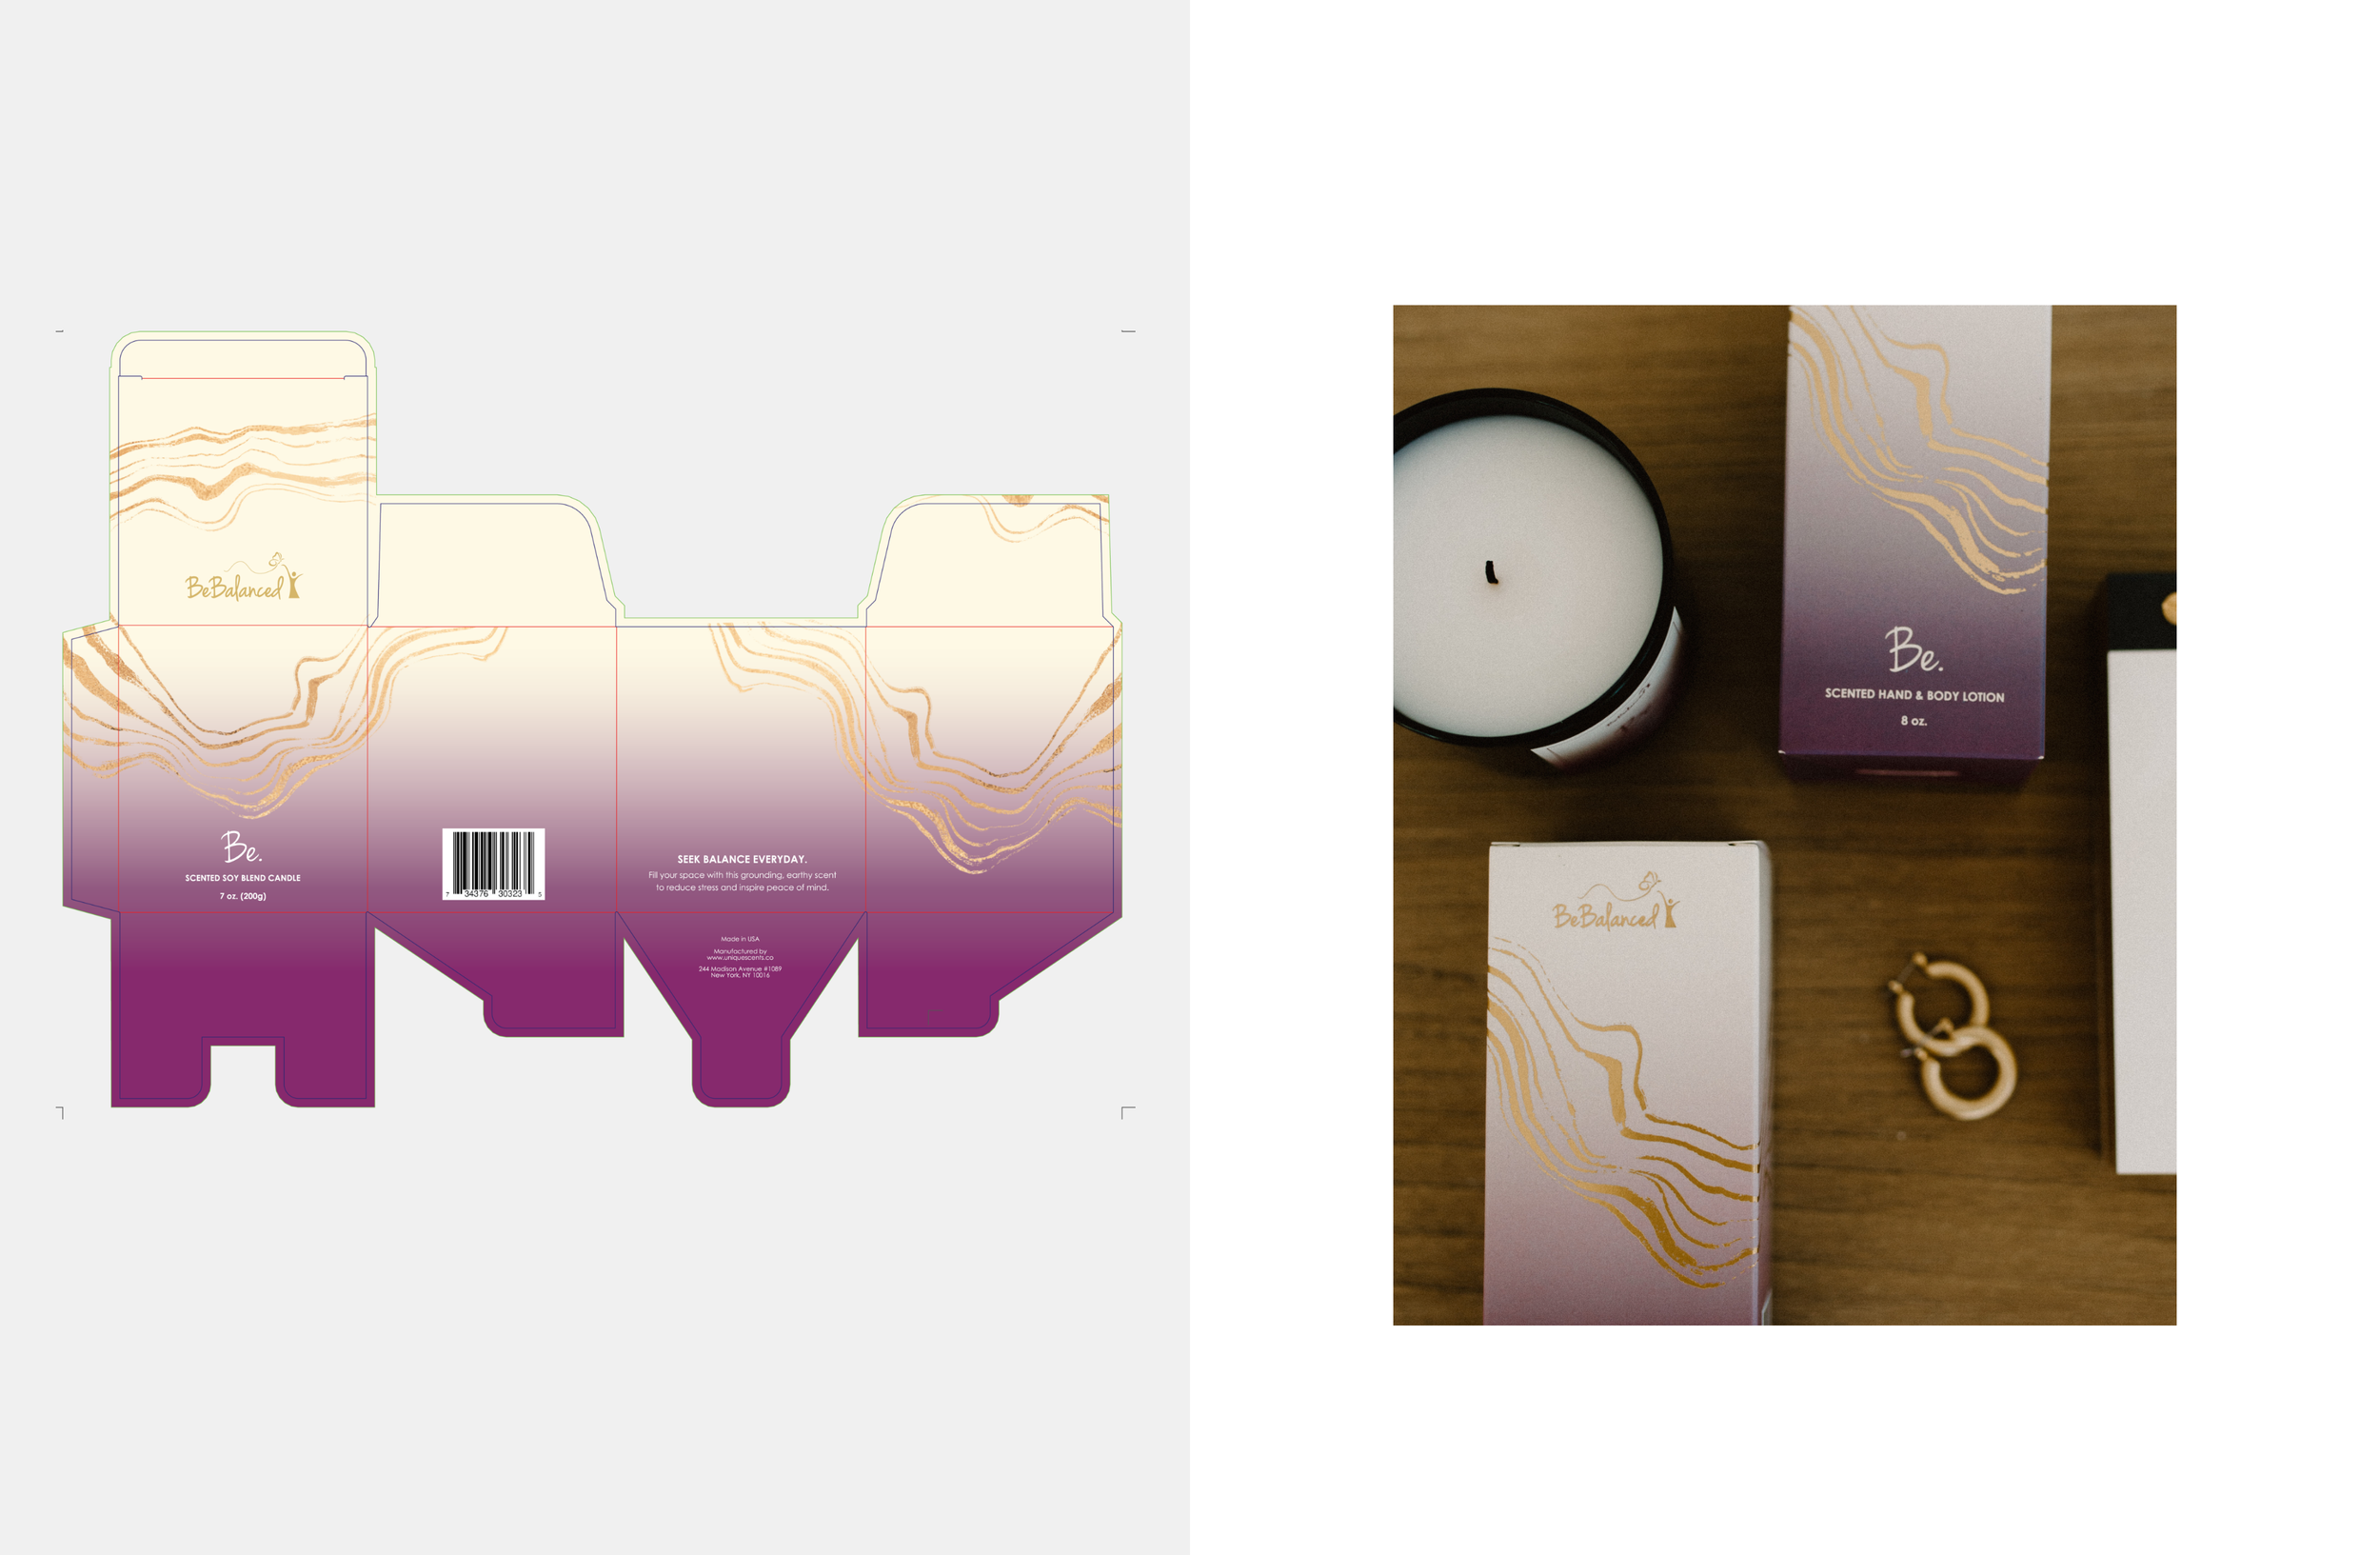 WildHive_BeBalanced-candle-andskincare-packaging_3-1.png